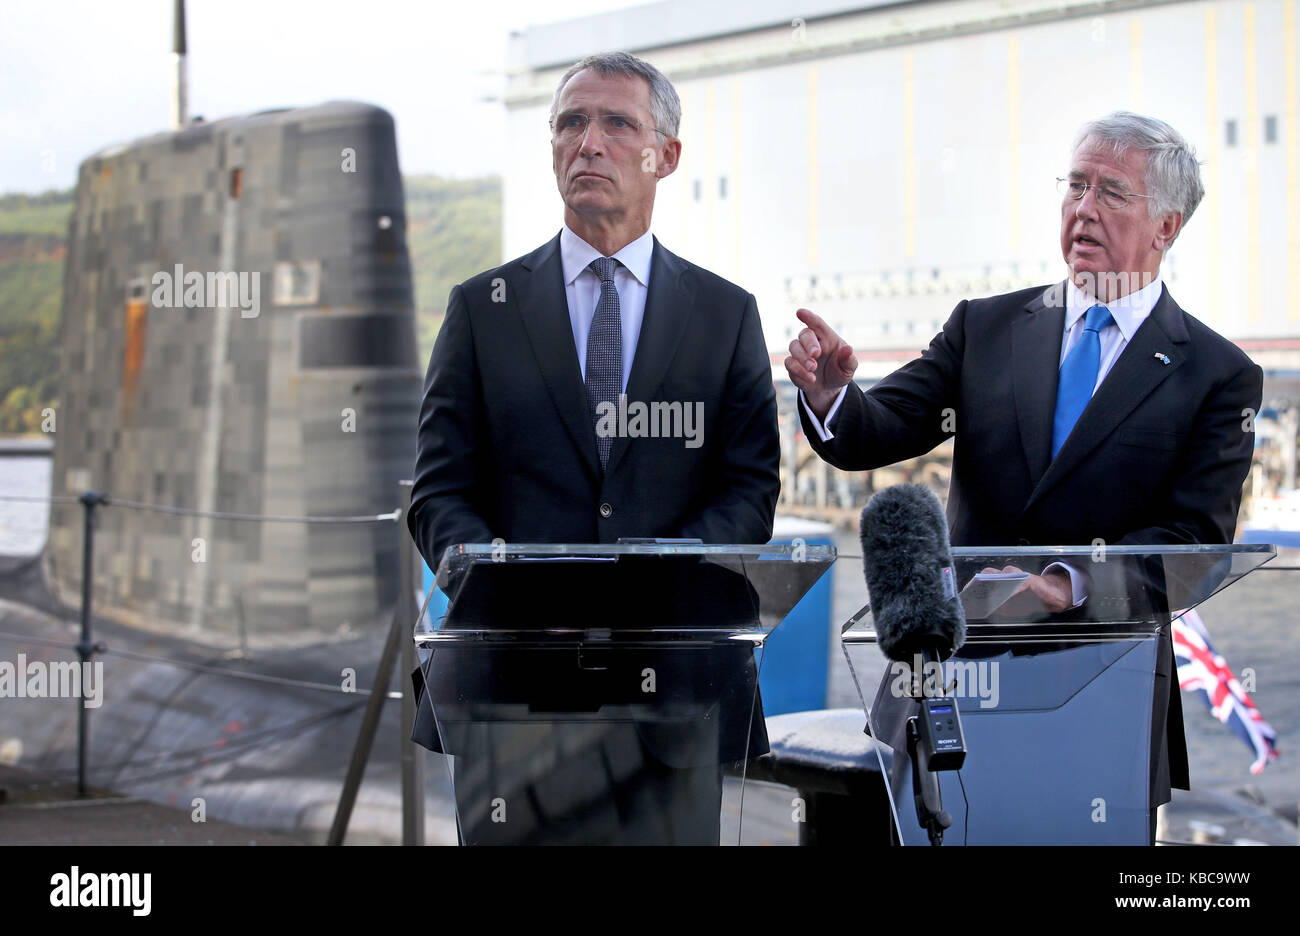 Defence Secretary Sir Michael Fallon (right) and Nato Secretary General Jens Stollenberg (left) speak to the media alongside the Vanguard-class nuclear deterrent submarine HMS Vengeance during a visit to HM Naval Base Clyde, Faslane, where bilateral talks on collective global security were held. Stock Photo